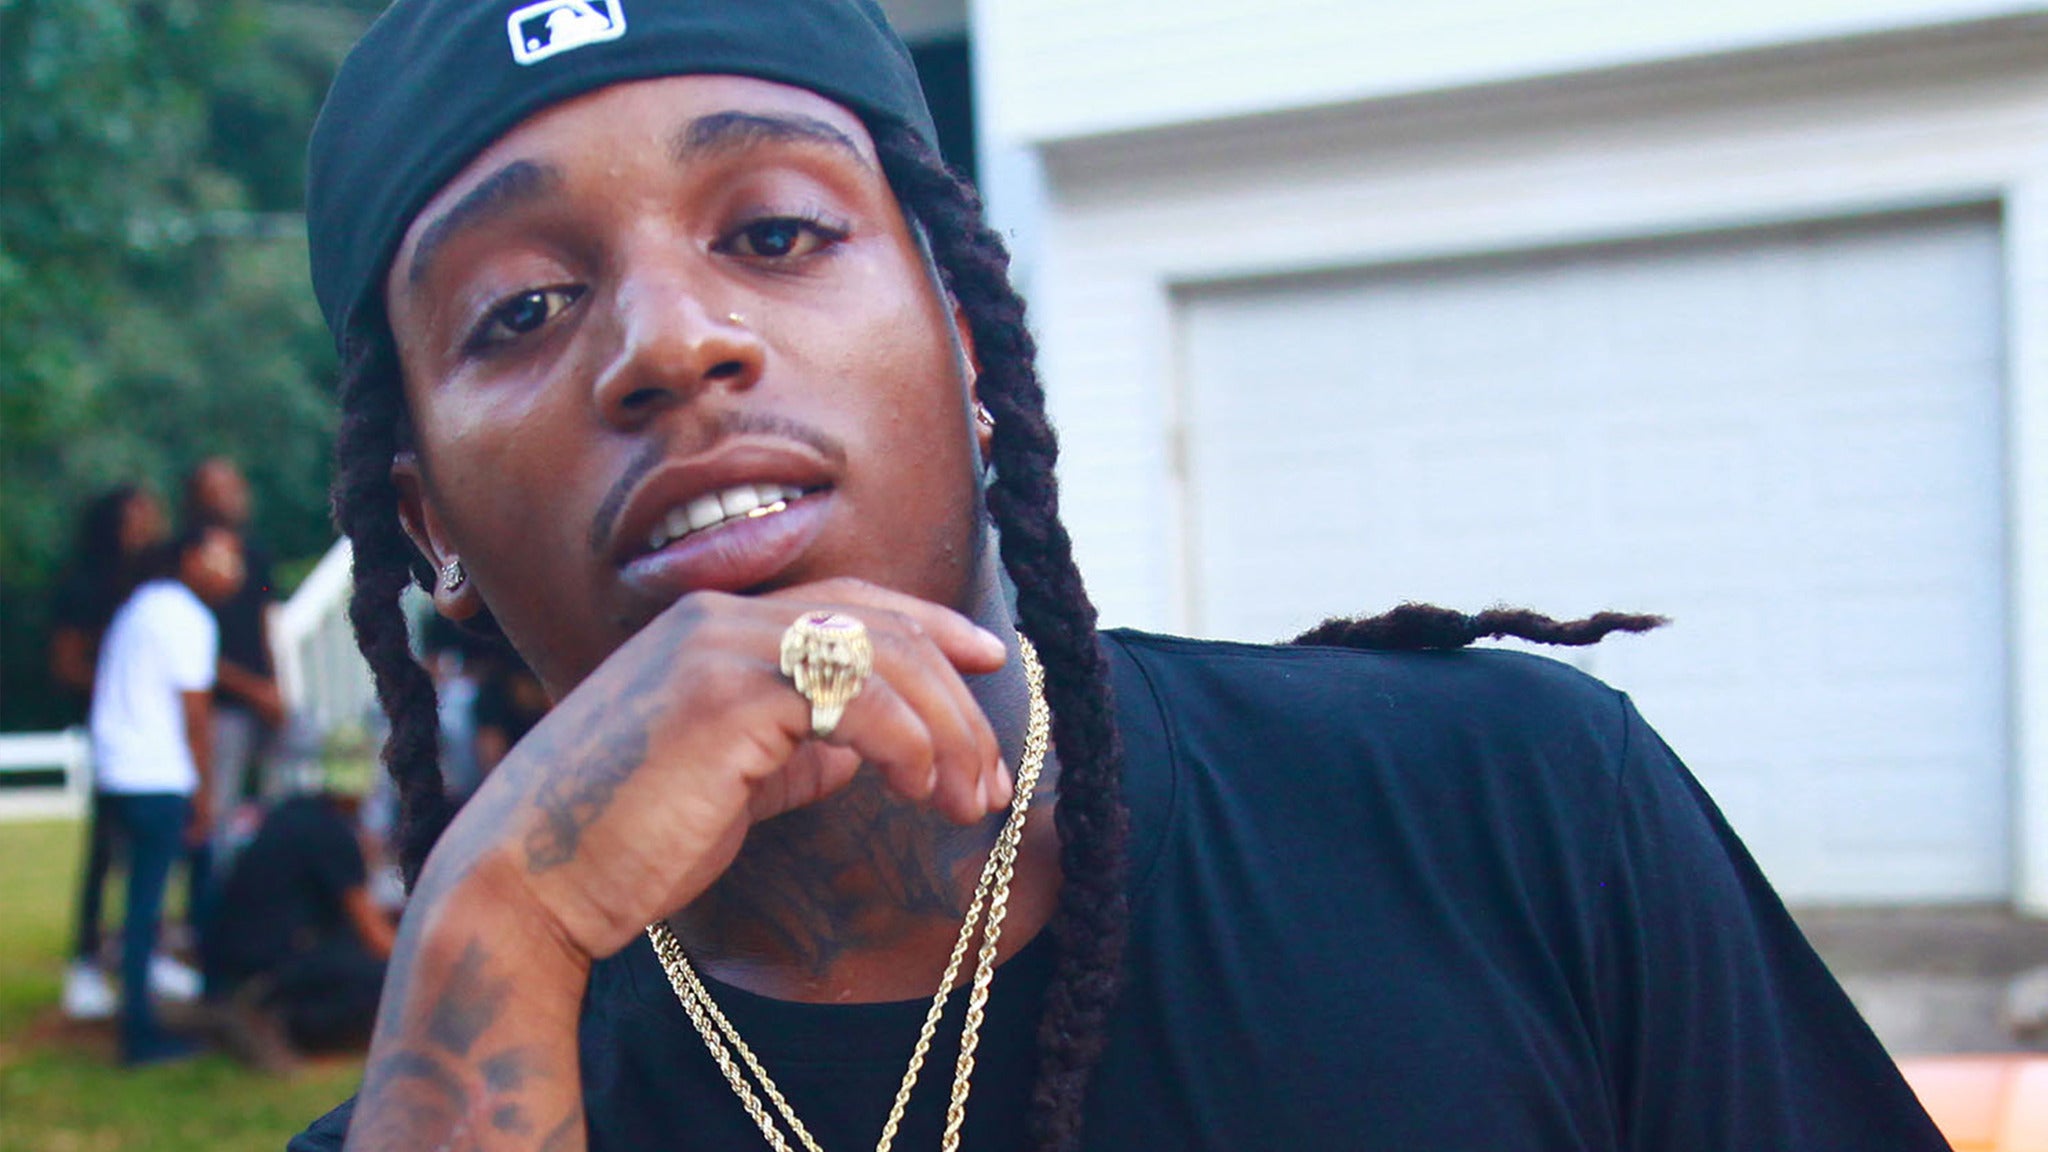 Jacquees in Cleveland promo photo for Jacquees Early Entry RSVD presale offer code